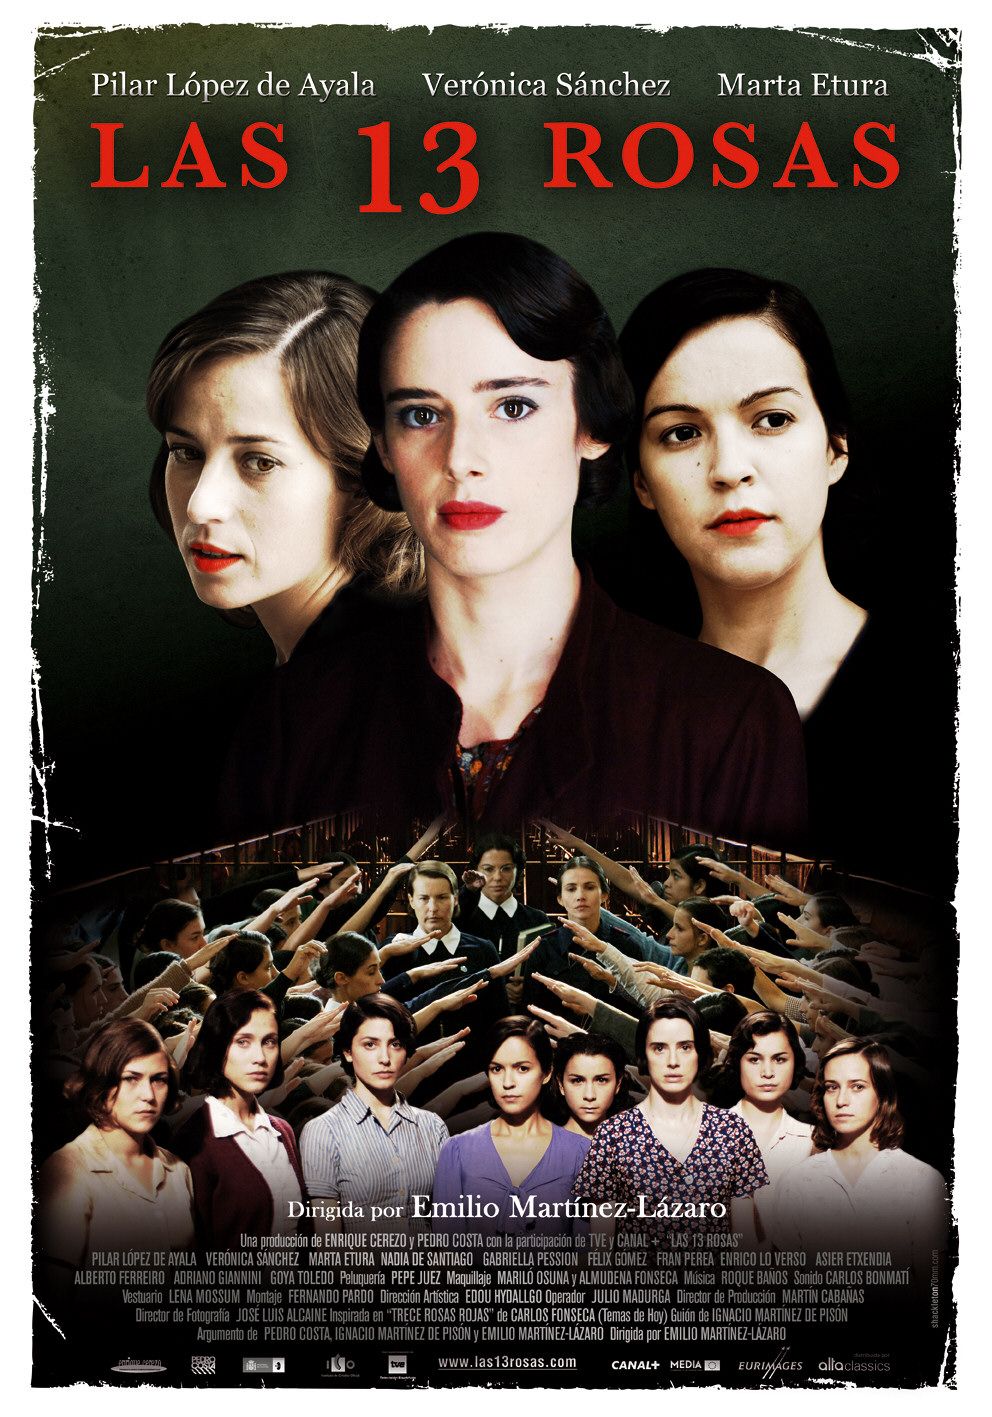 Extra Large Movie Poster Image for 13 rosas, Las 